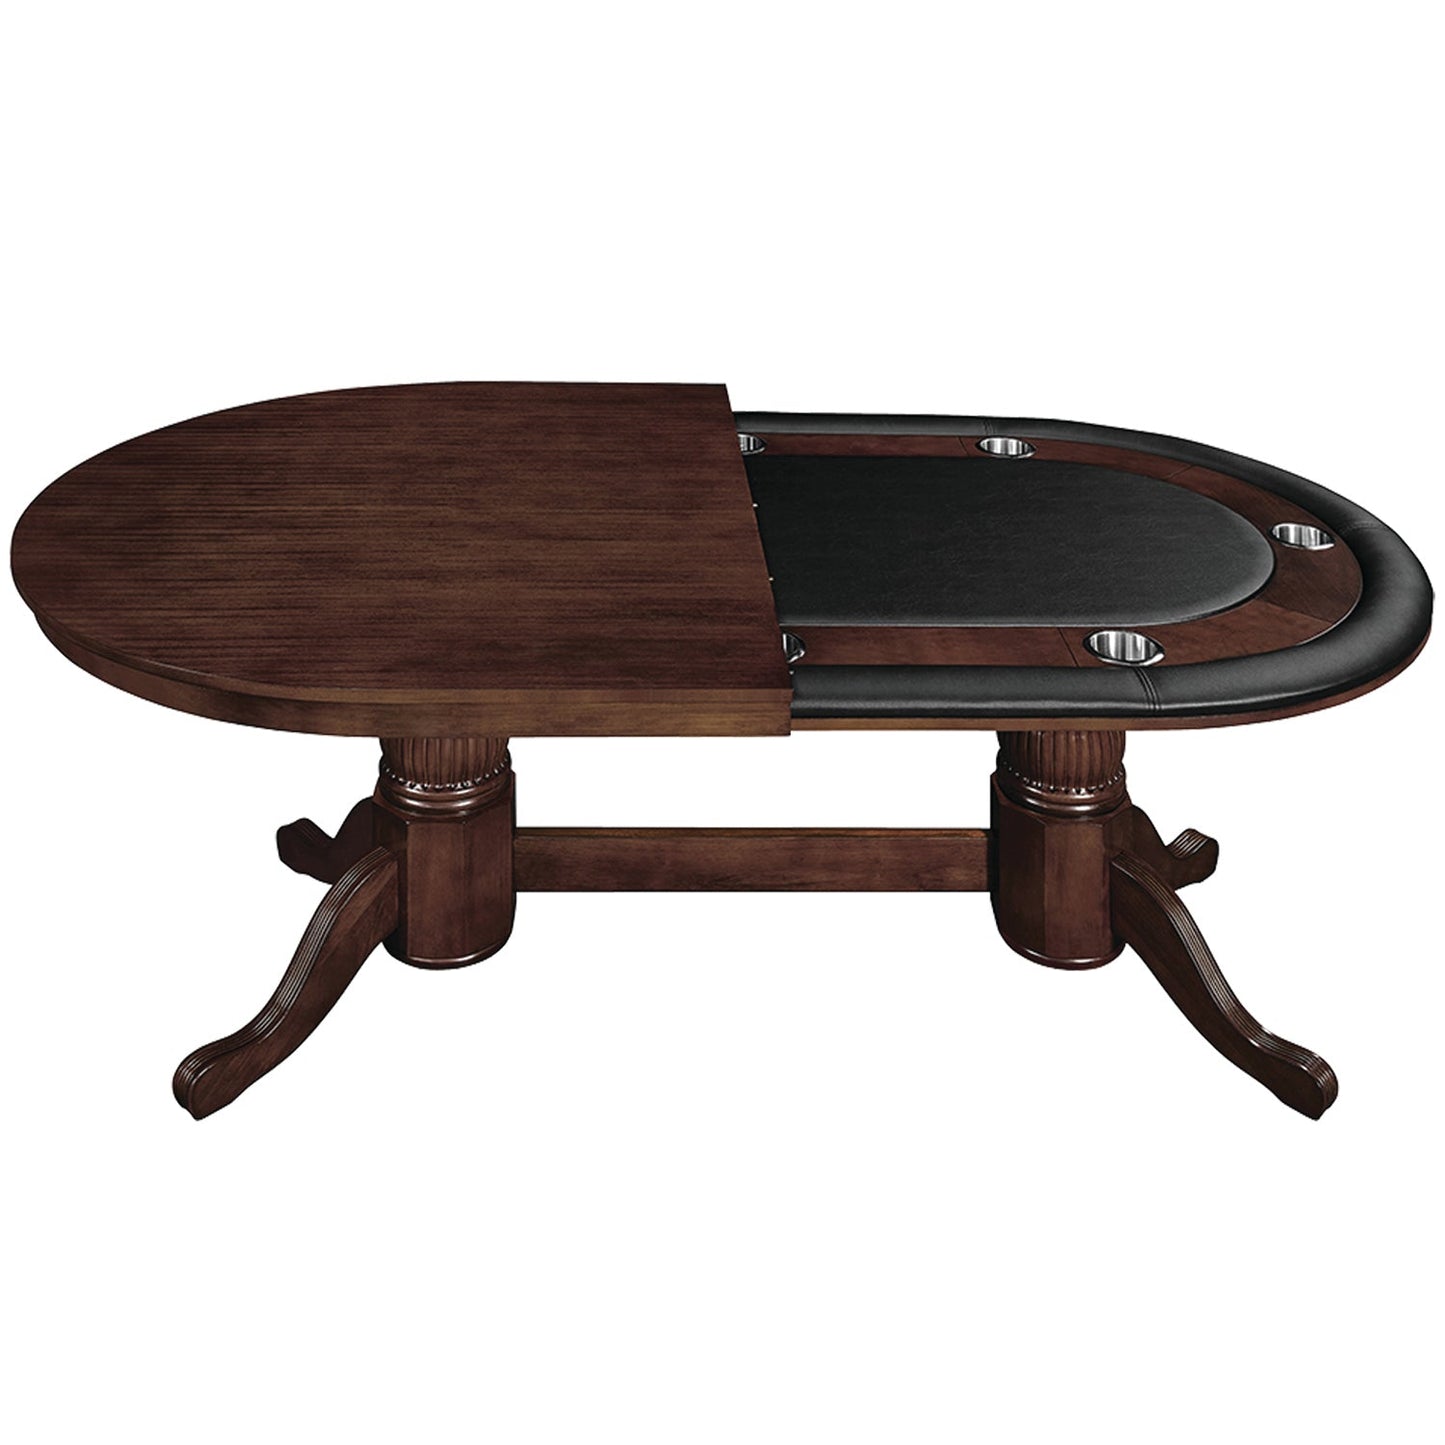 84" TEXAS HOLD'EM GAME TABLE DINING TOP- CAPPUCCINO